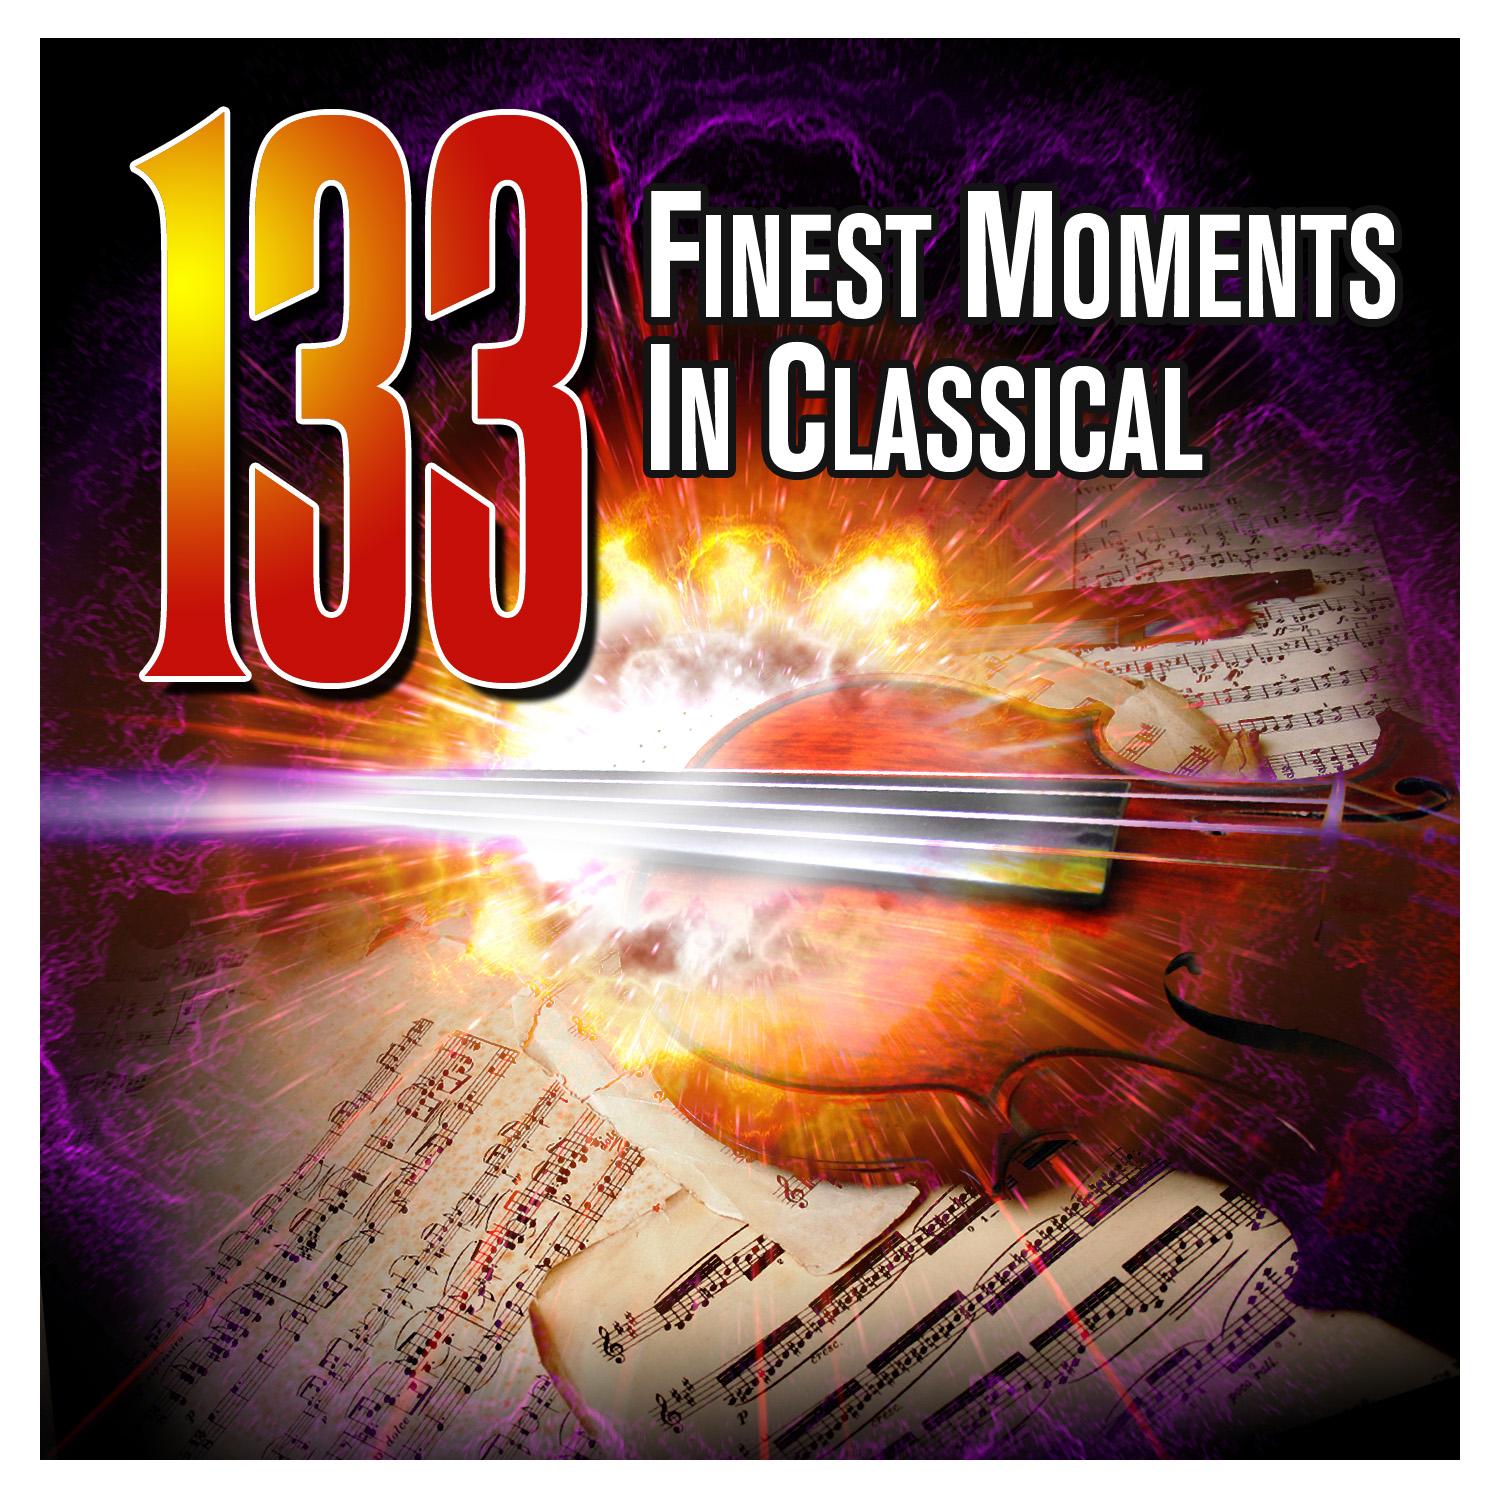 133 Finest Moments in Classical